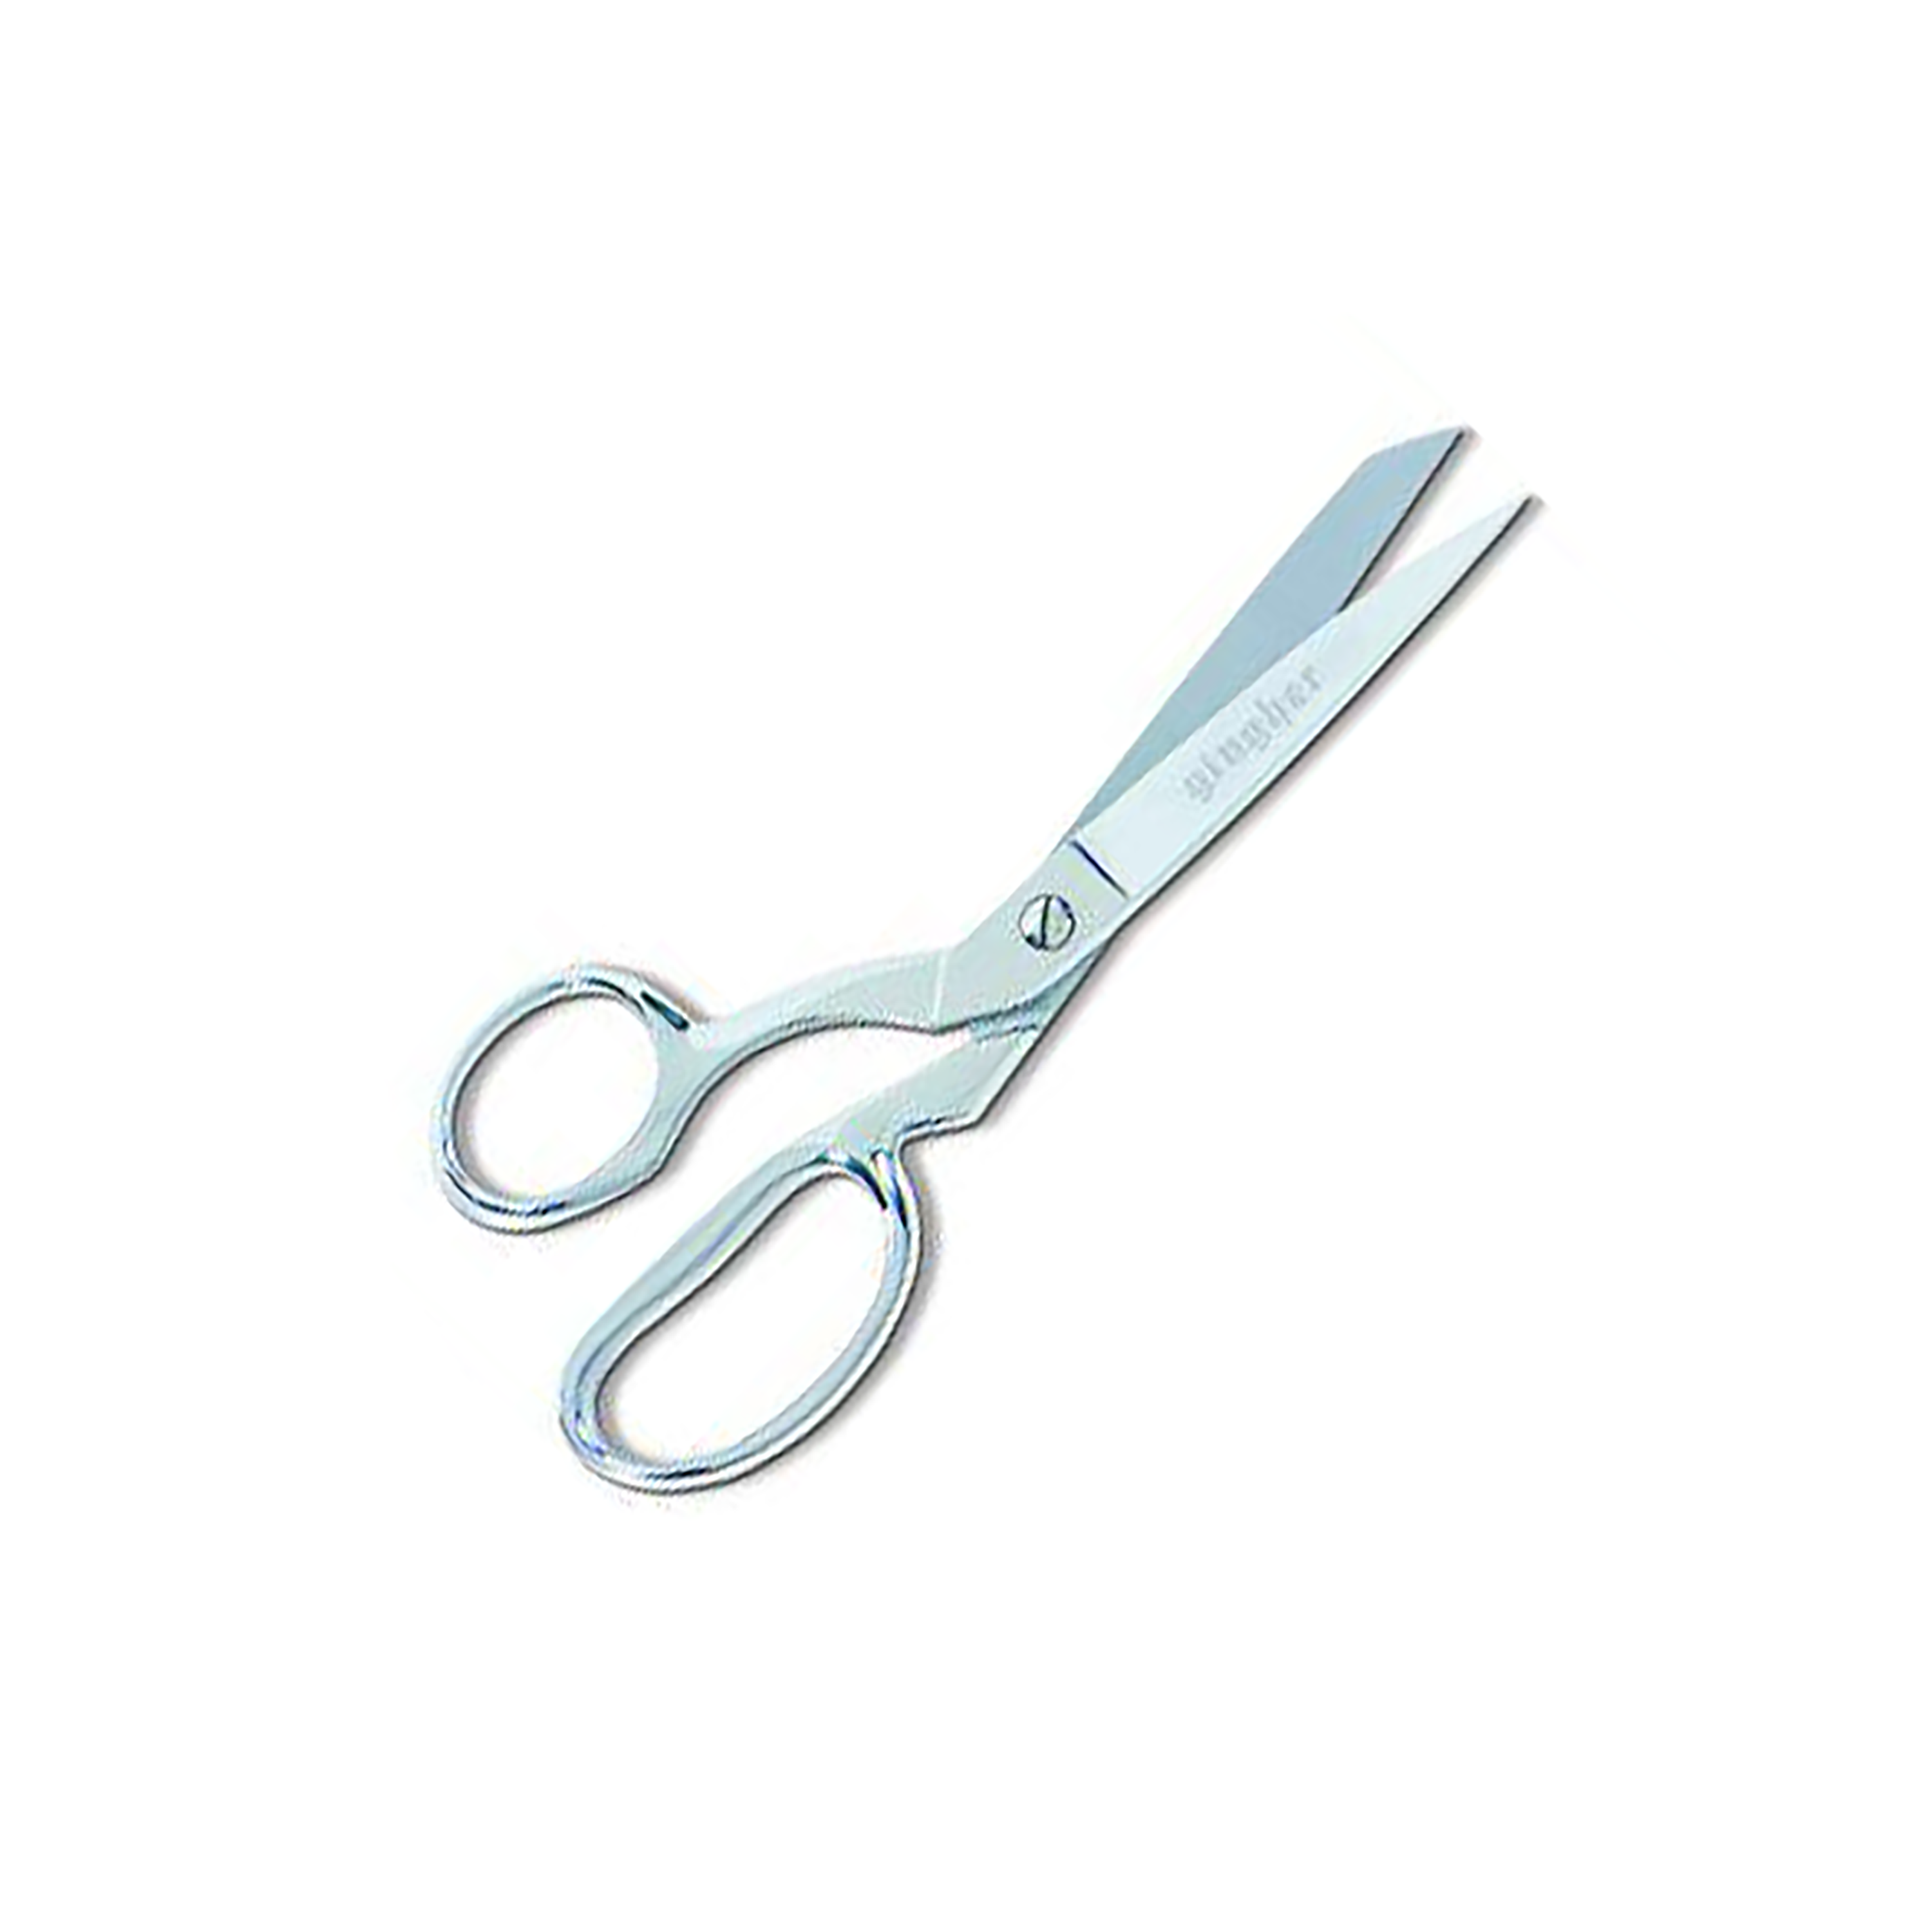 Gingher Sewing Scissors & Shears for sale